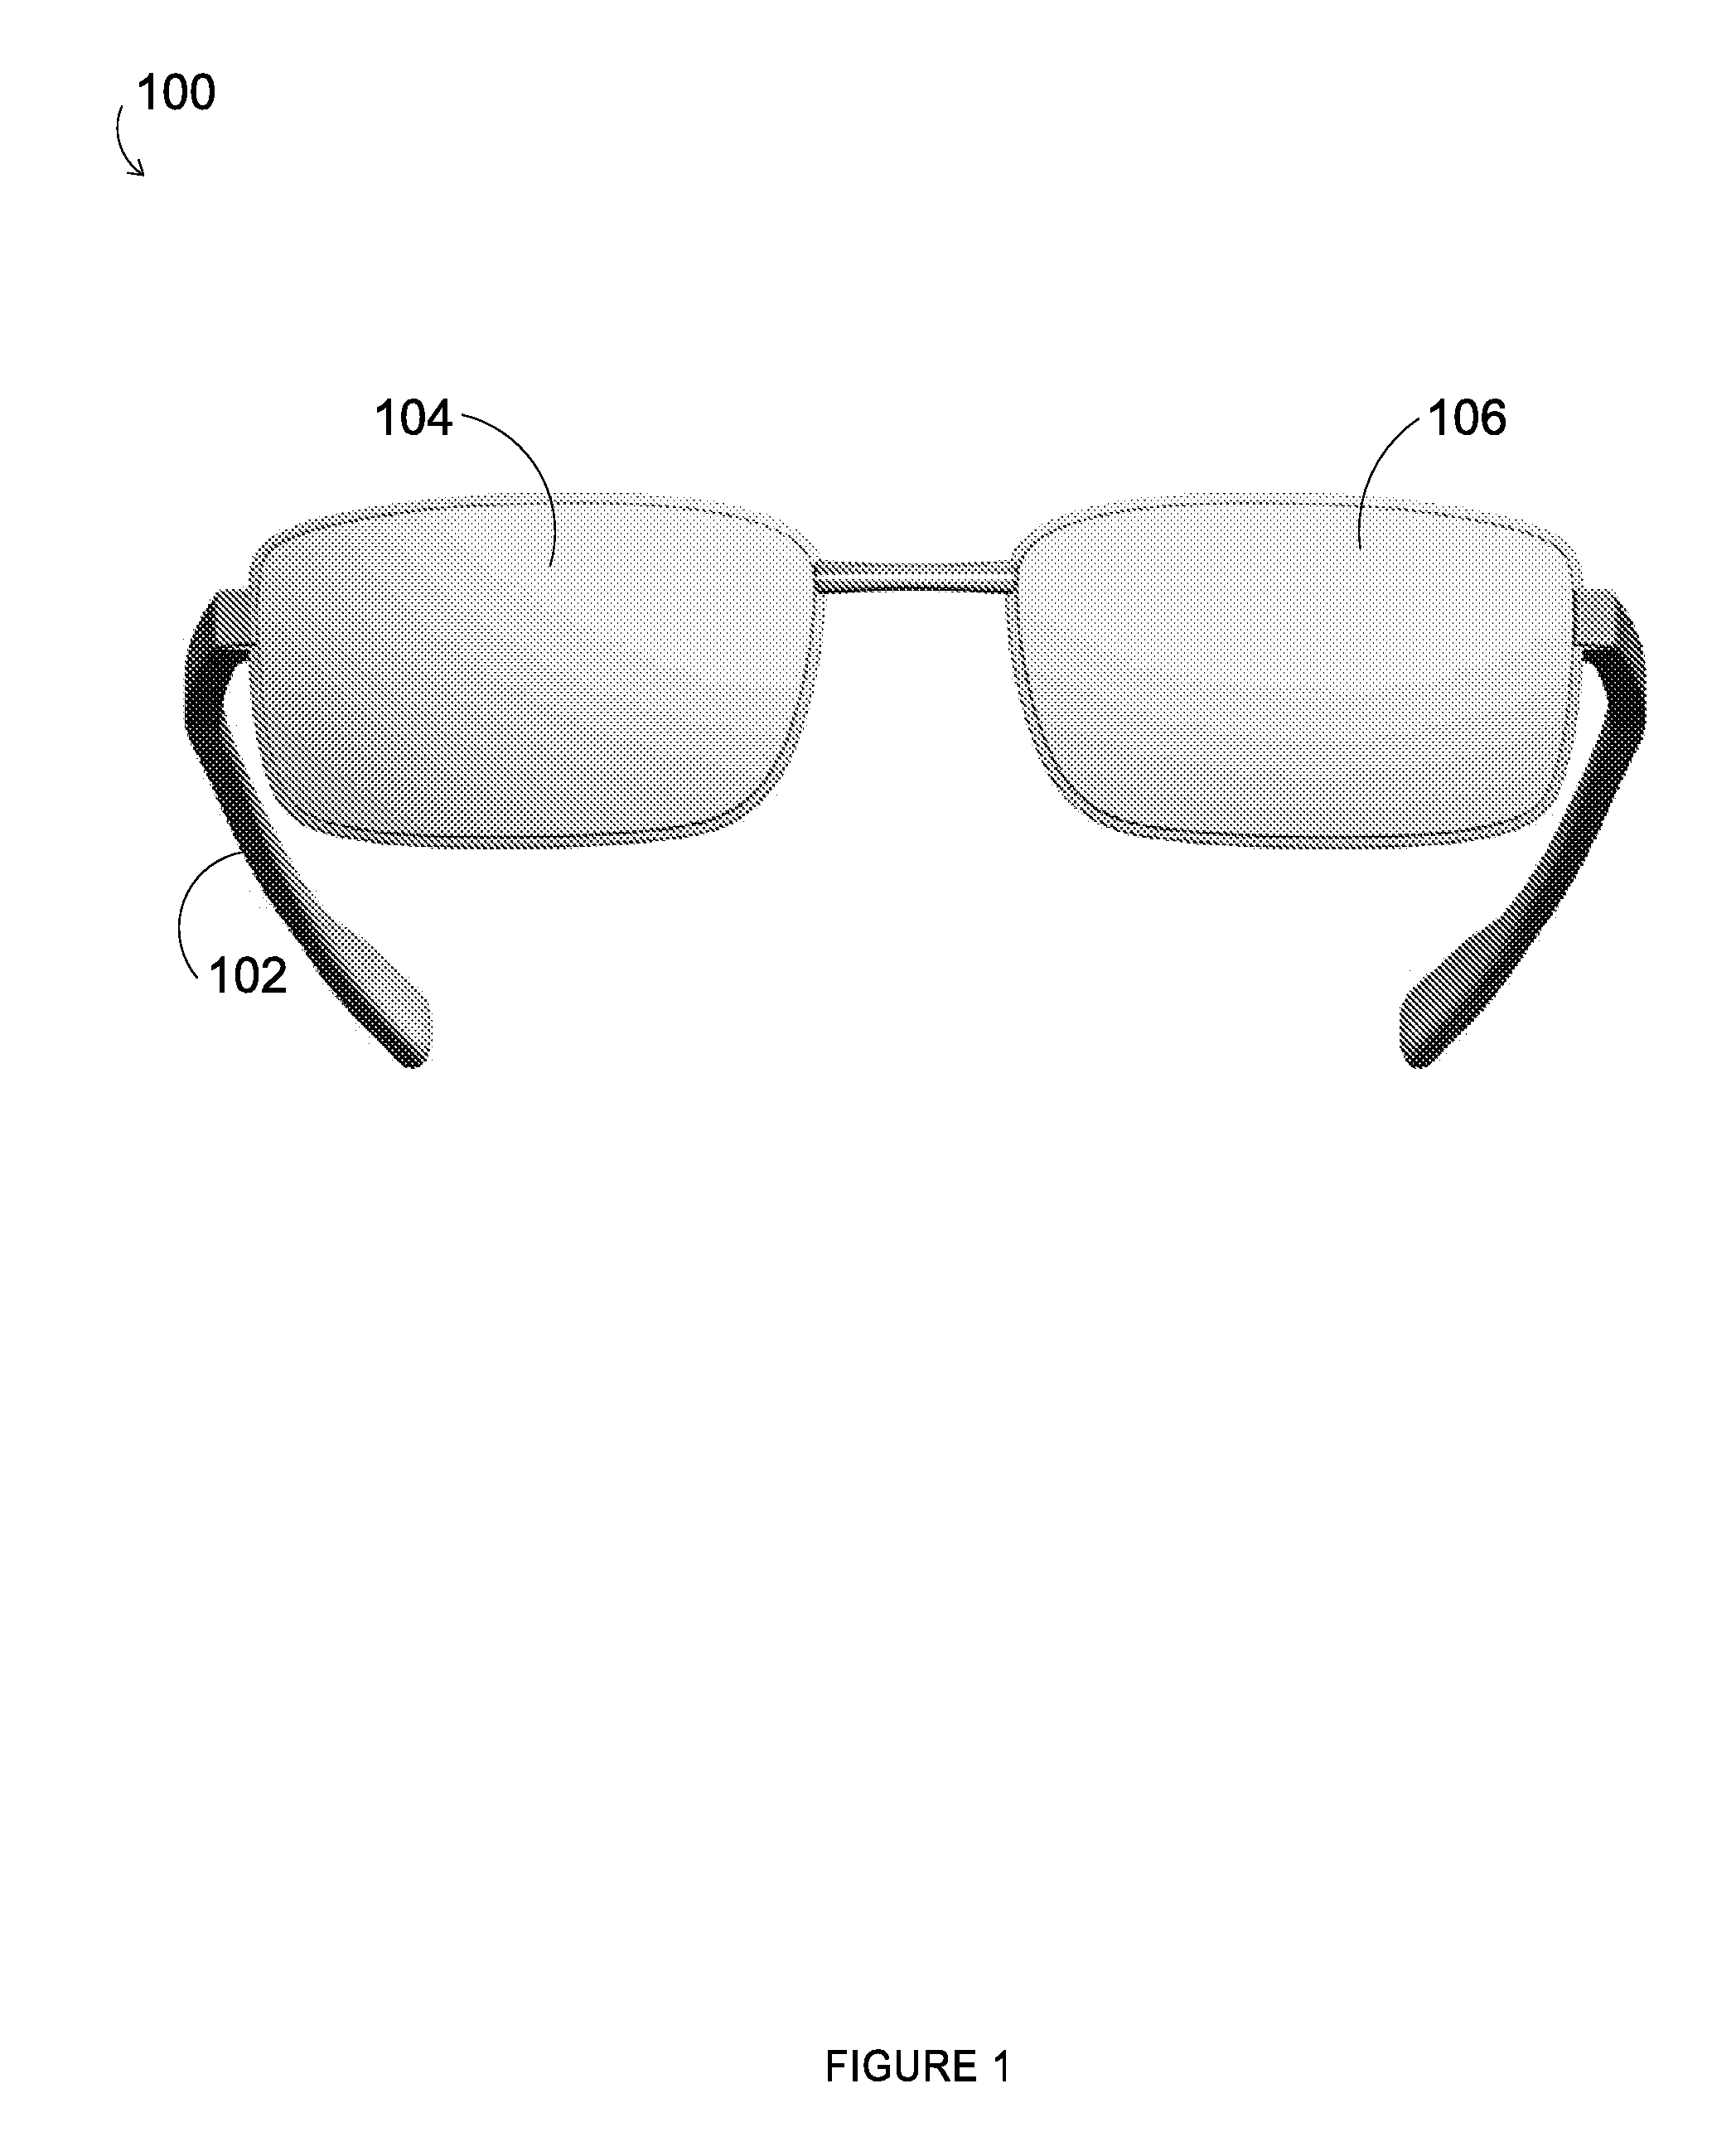 Electro-active spectacles and associated electronics